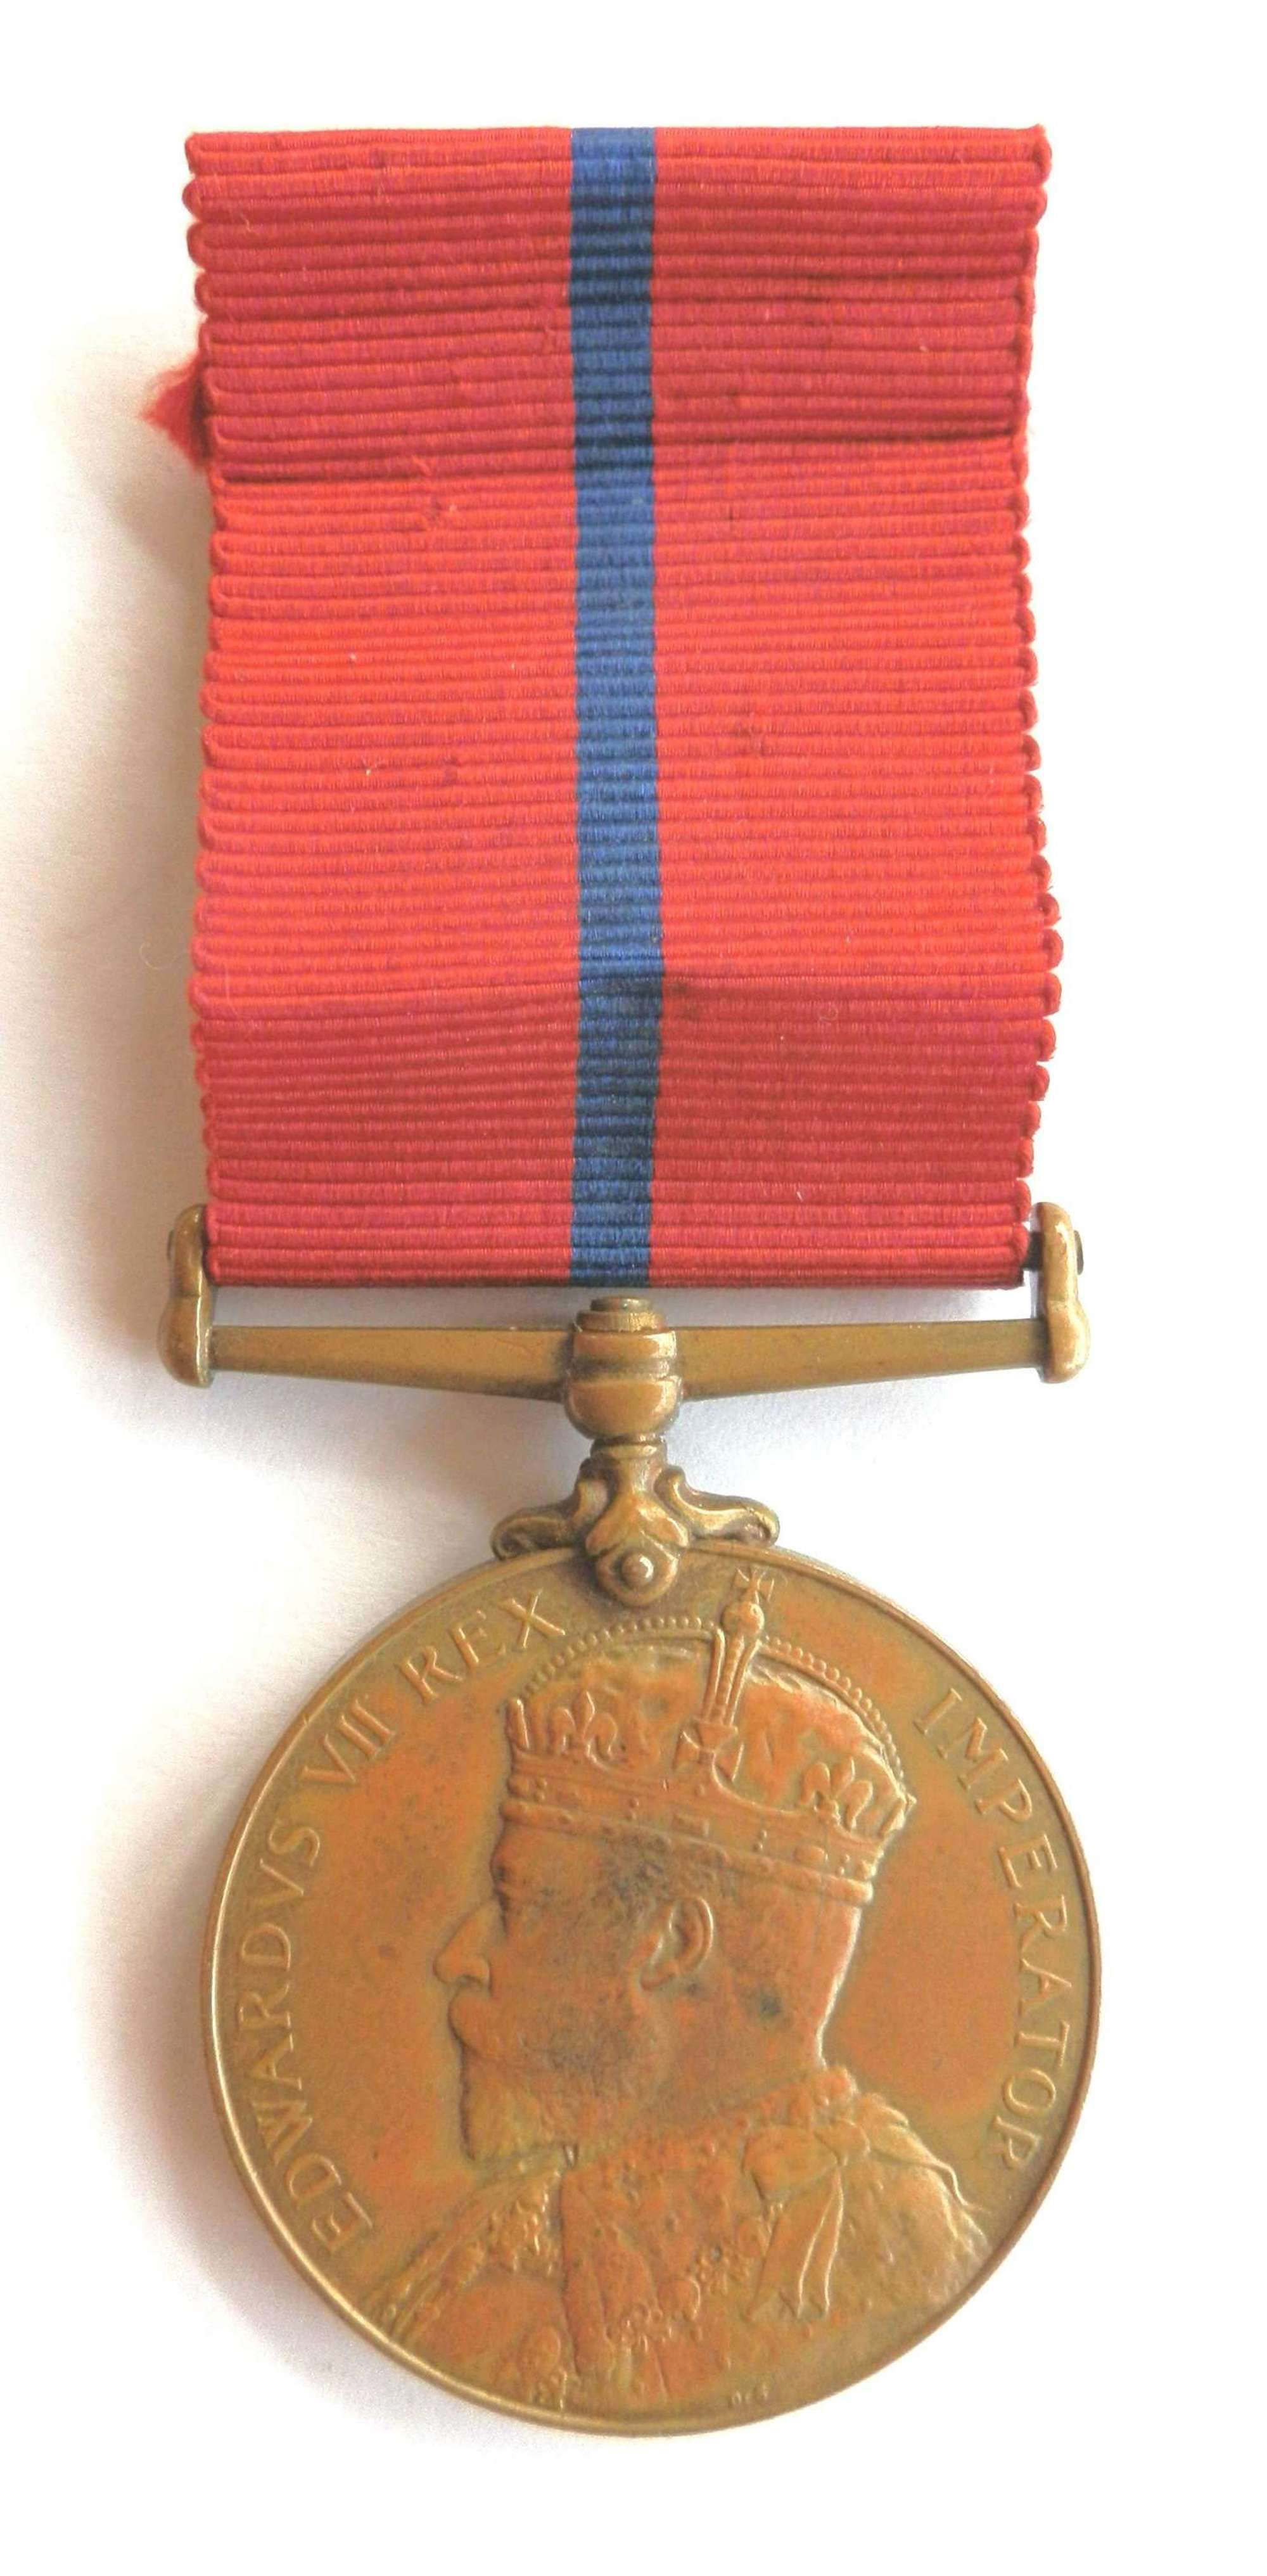 Coronation (Police) Medal 1902. PC G. Babbage, Met Police.